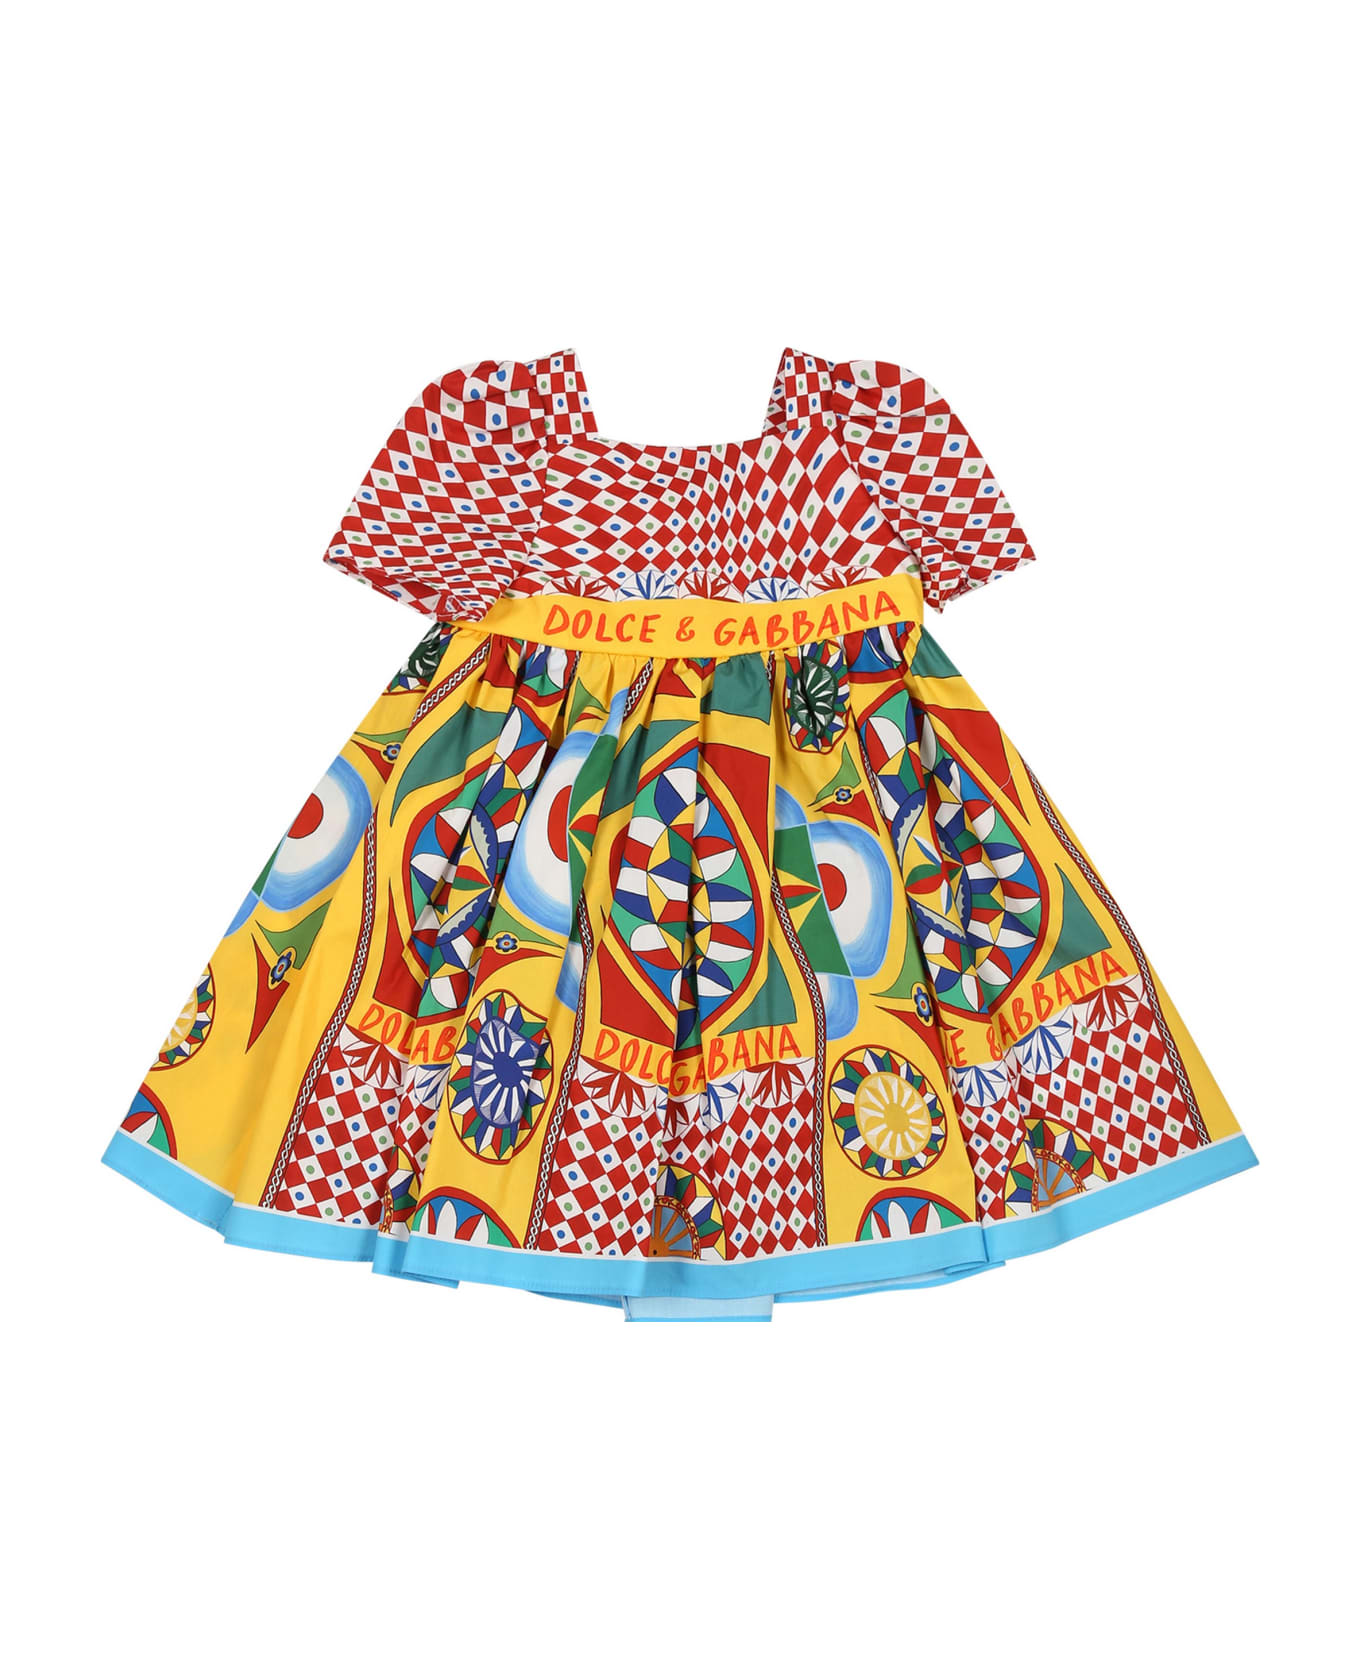 Dolce & Gabbana Red Dress For Baby Girl With Logo And Cart Print - Multicolor ウェア